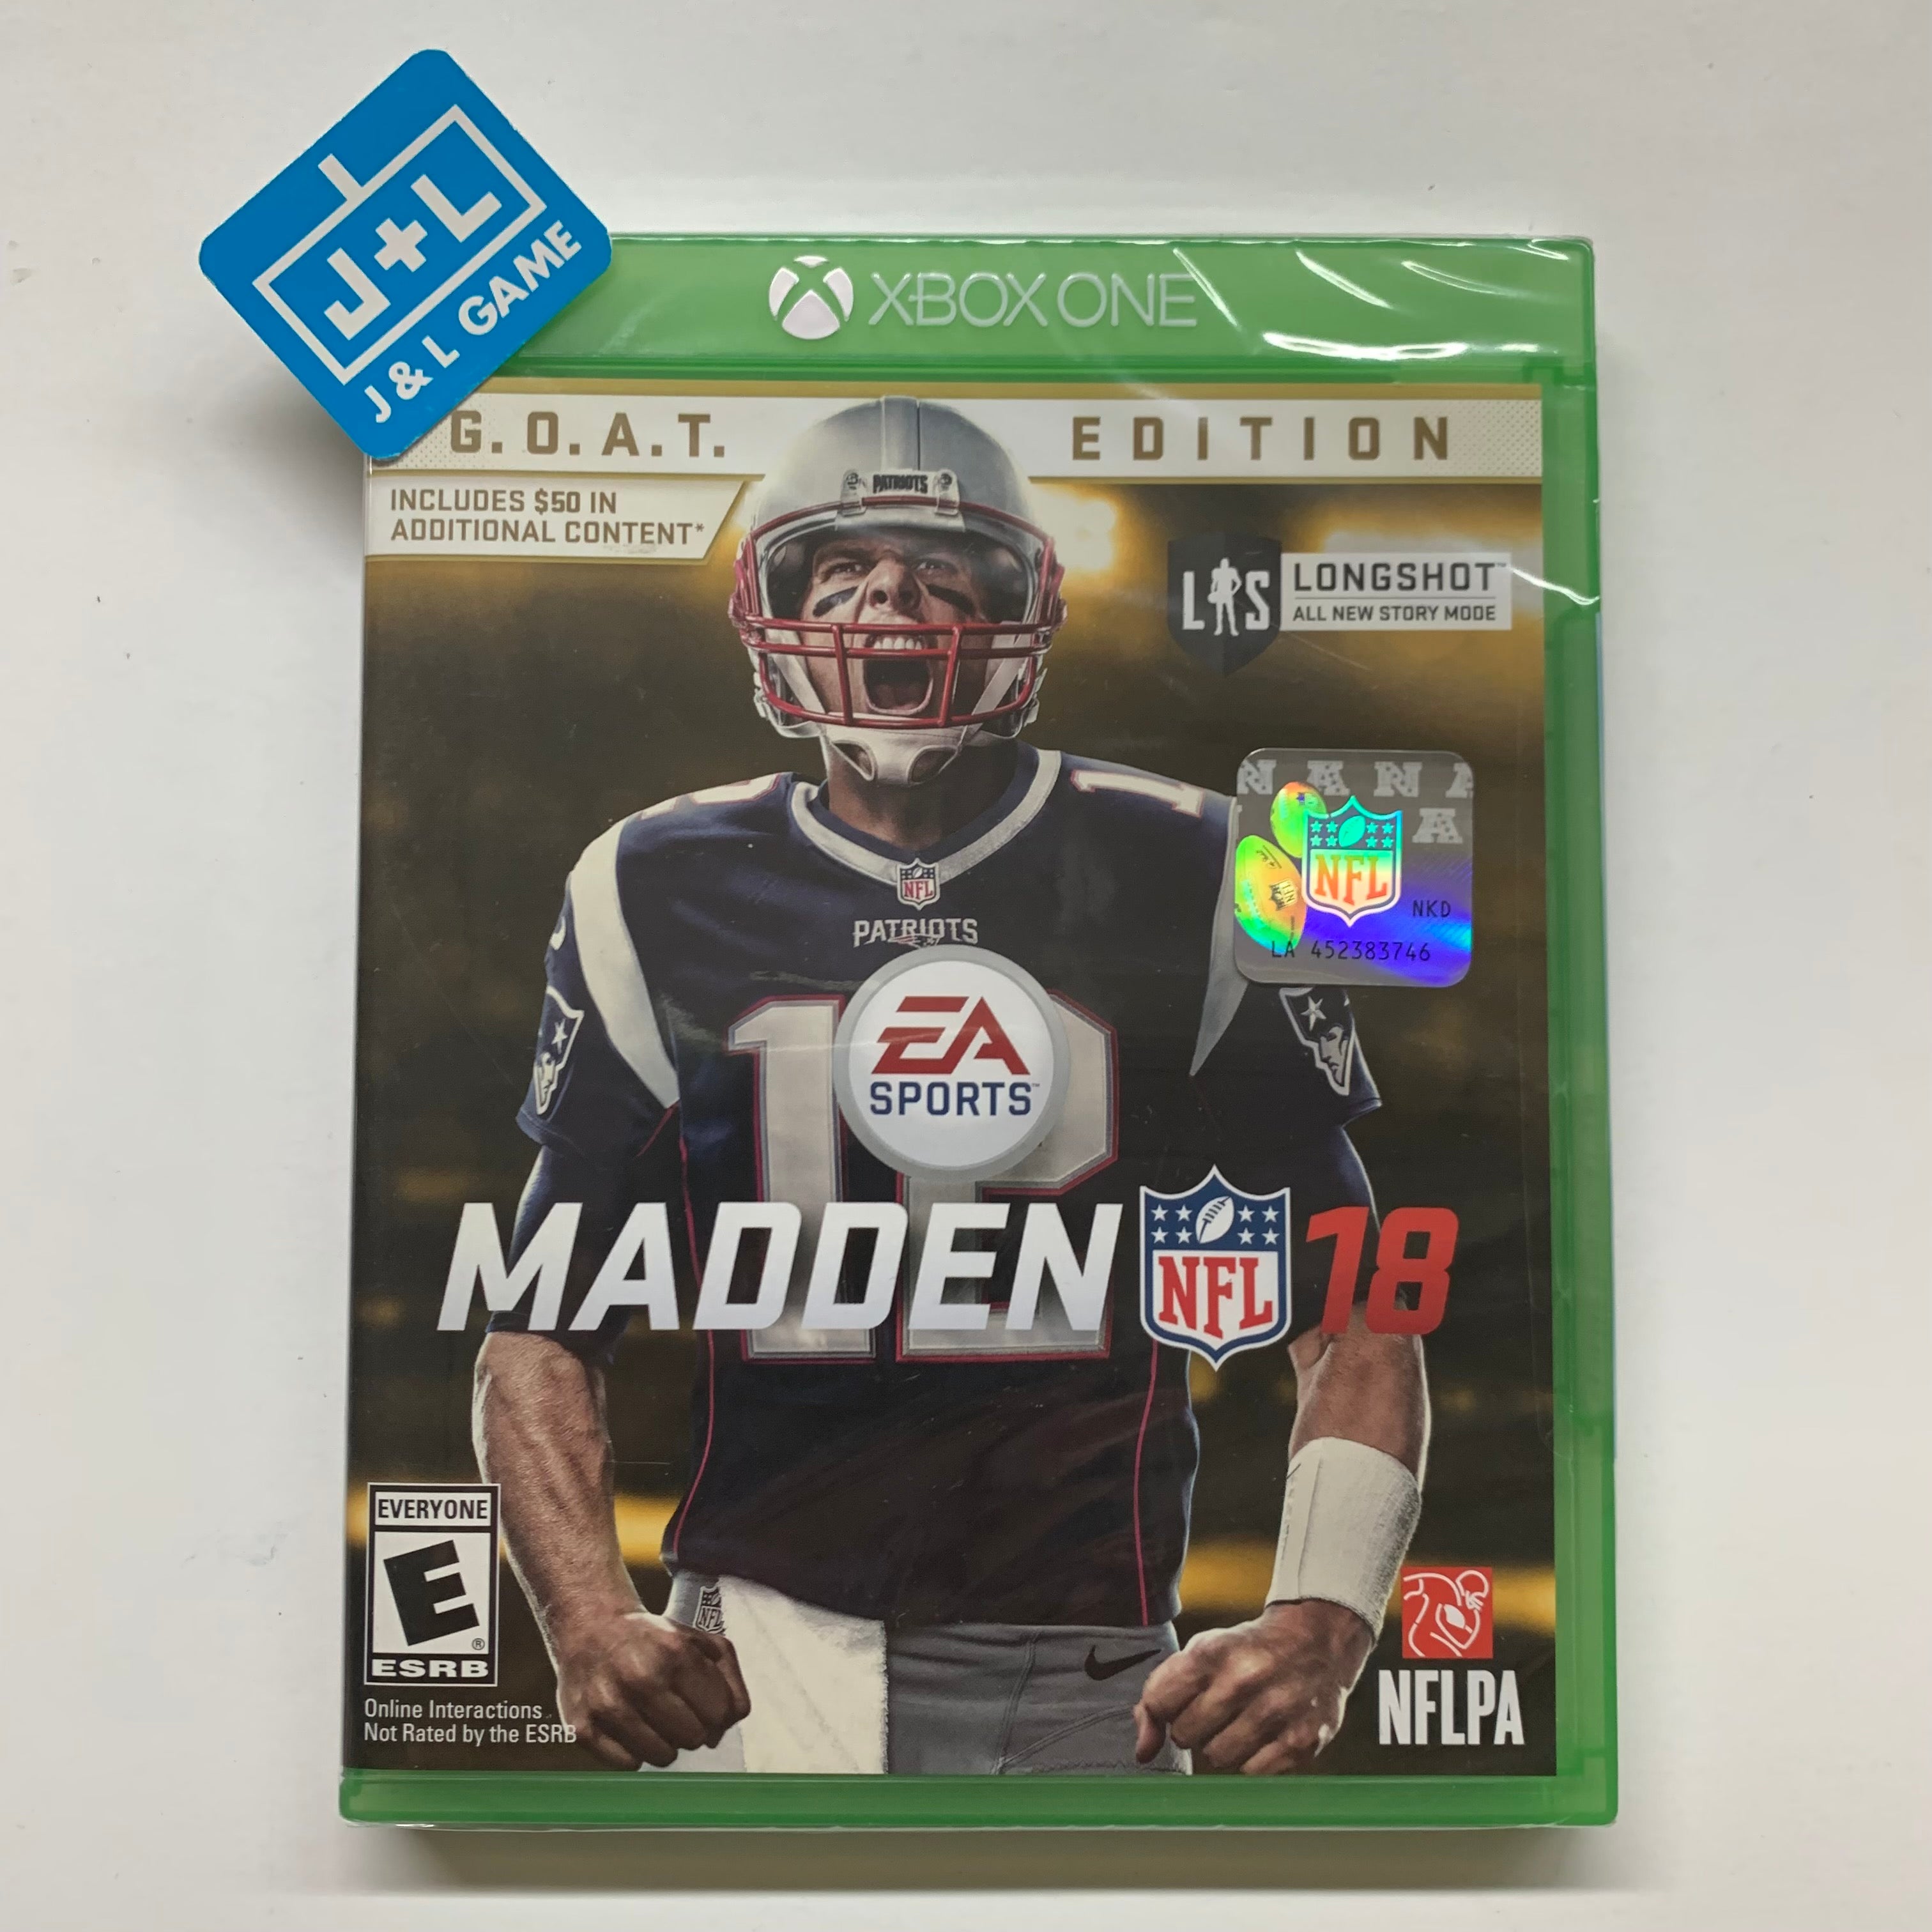 Madden NFL 18 (G.O.A.T. Edition) - (XB1) Xbox One Video Games Electronic Arts   